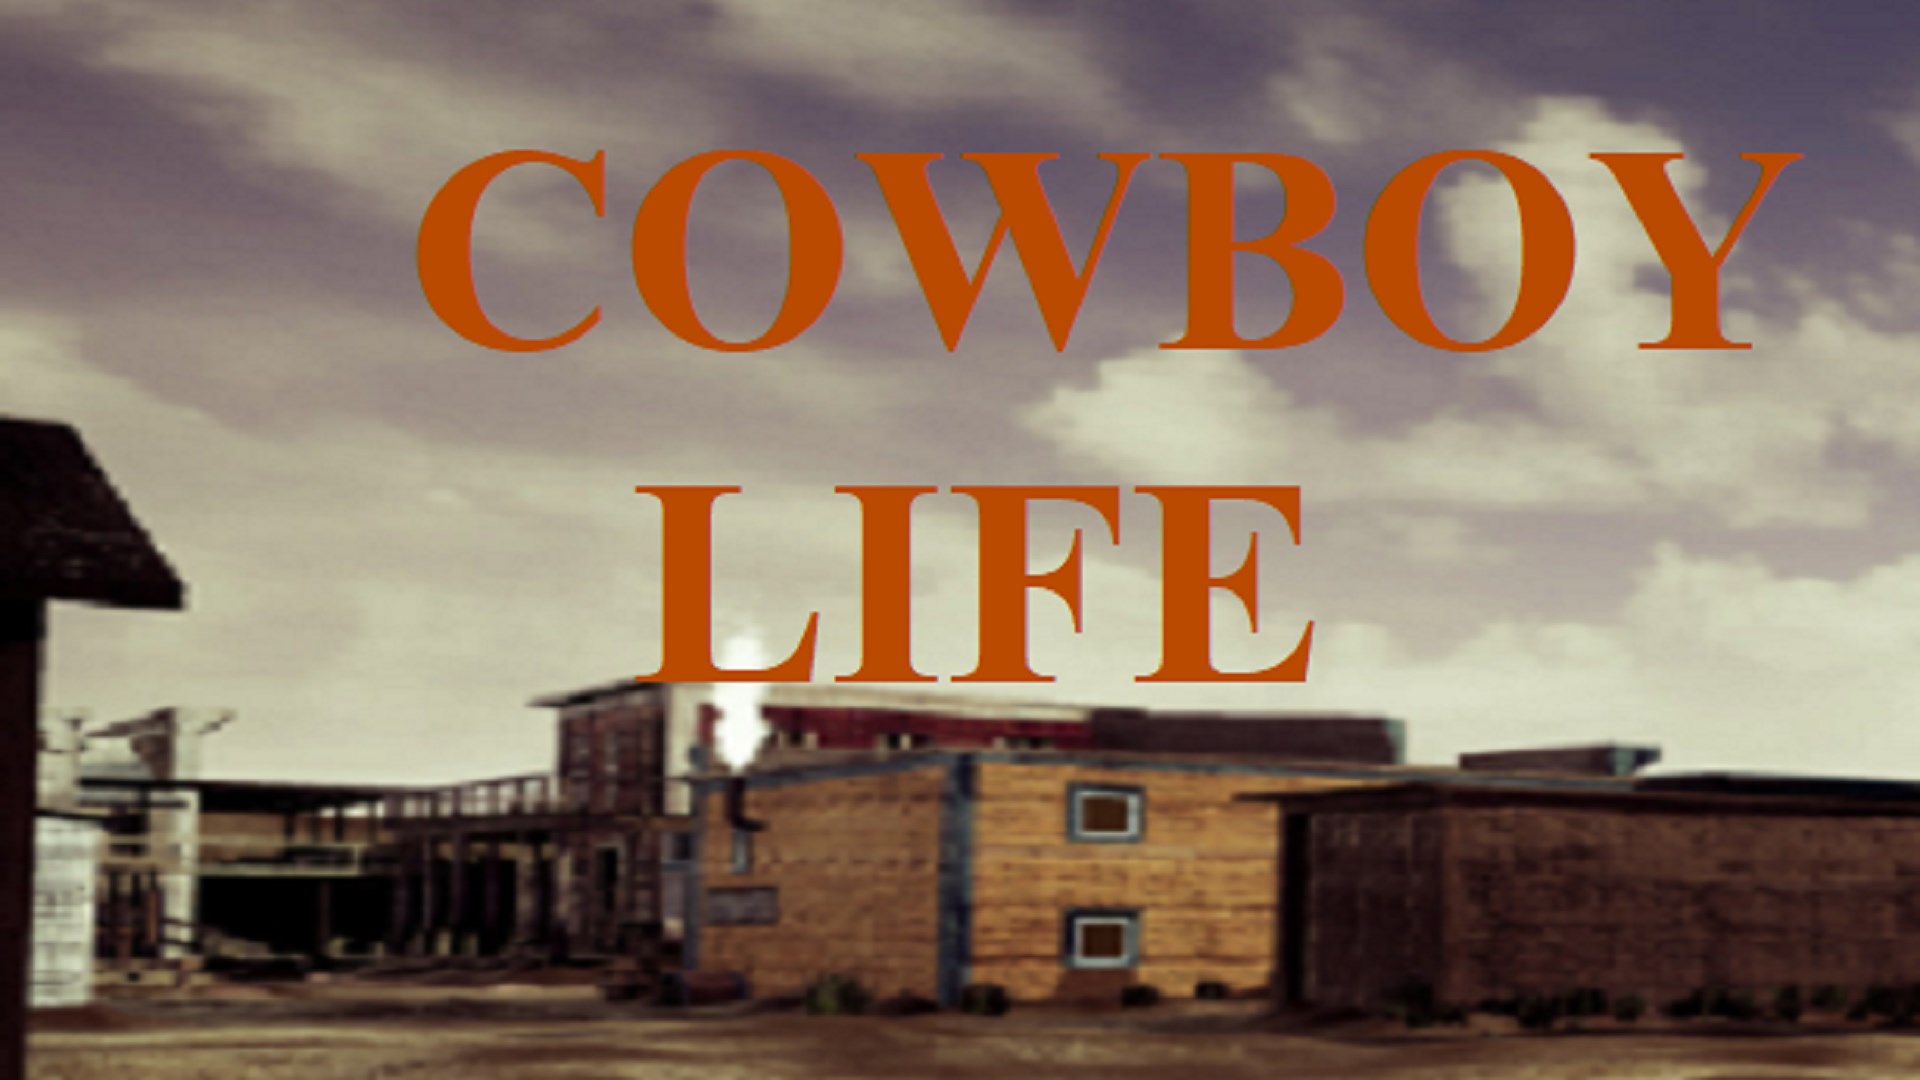 Find the best computers for Cowboy Life